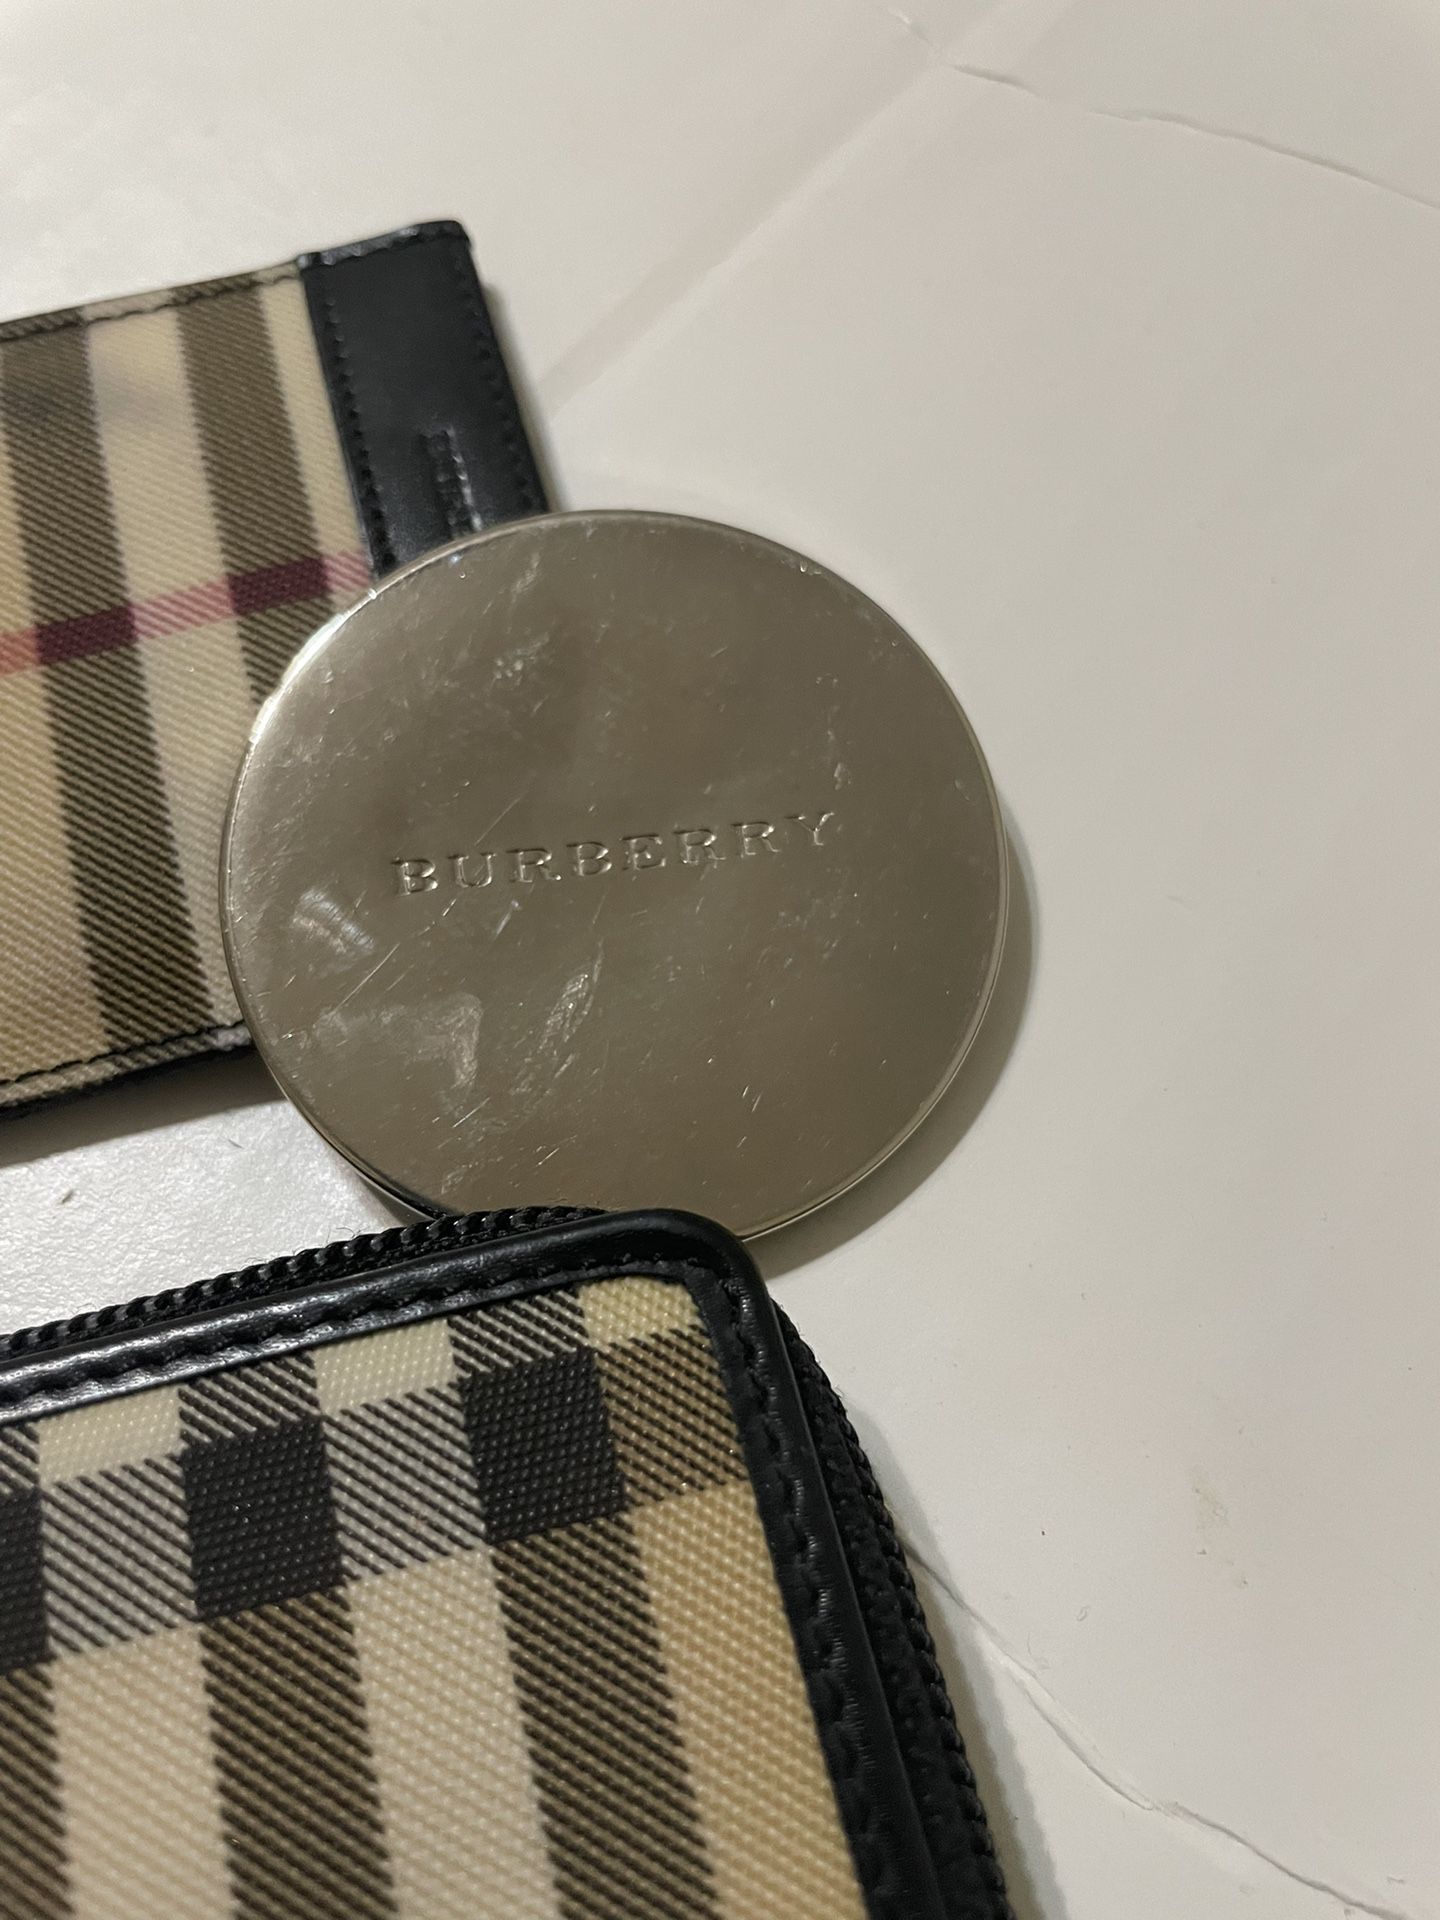 Burberry Card Holder Wallet for Sale in Queens, NY - OfferUp